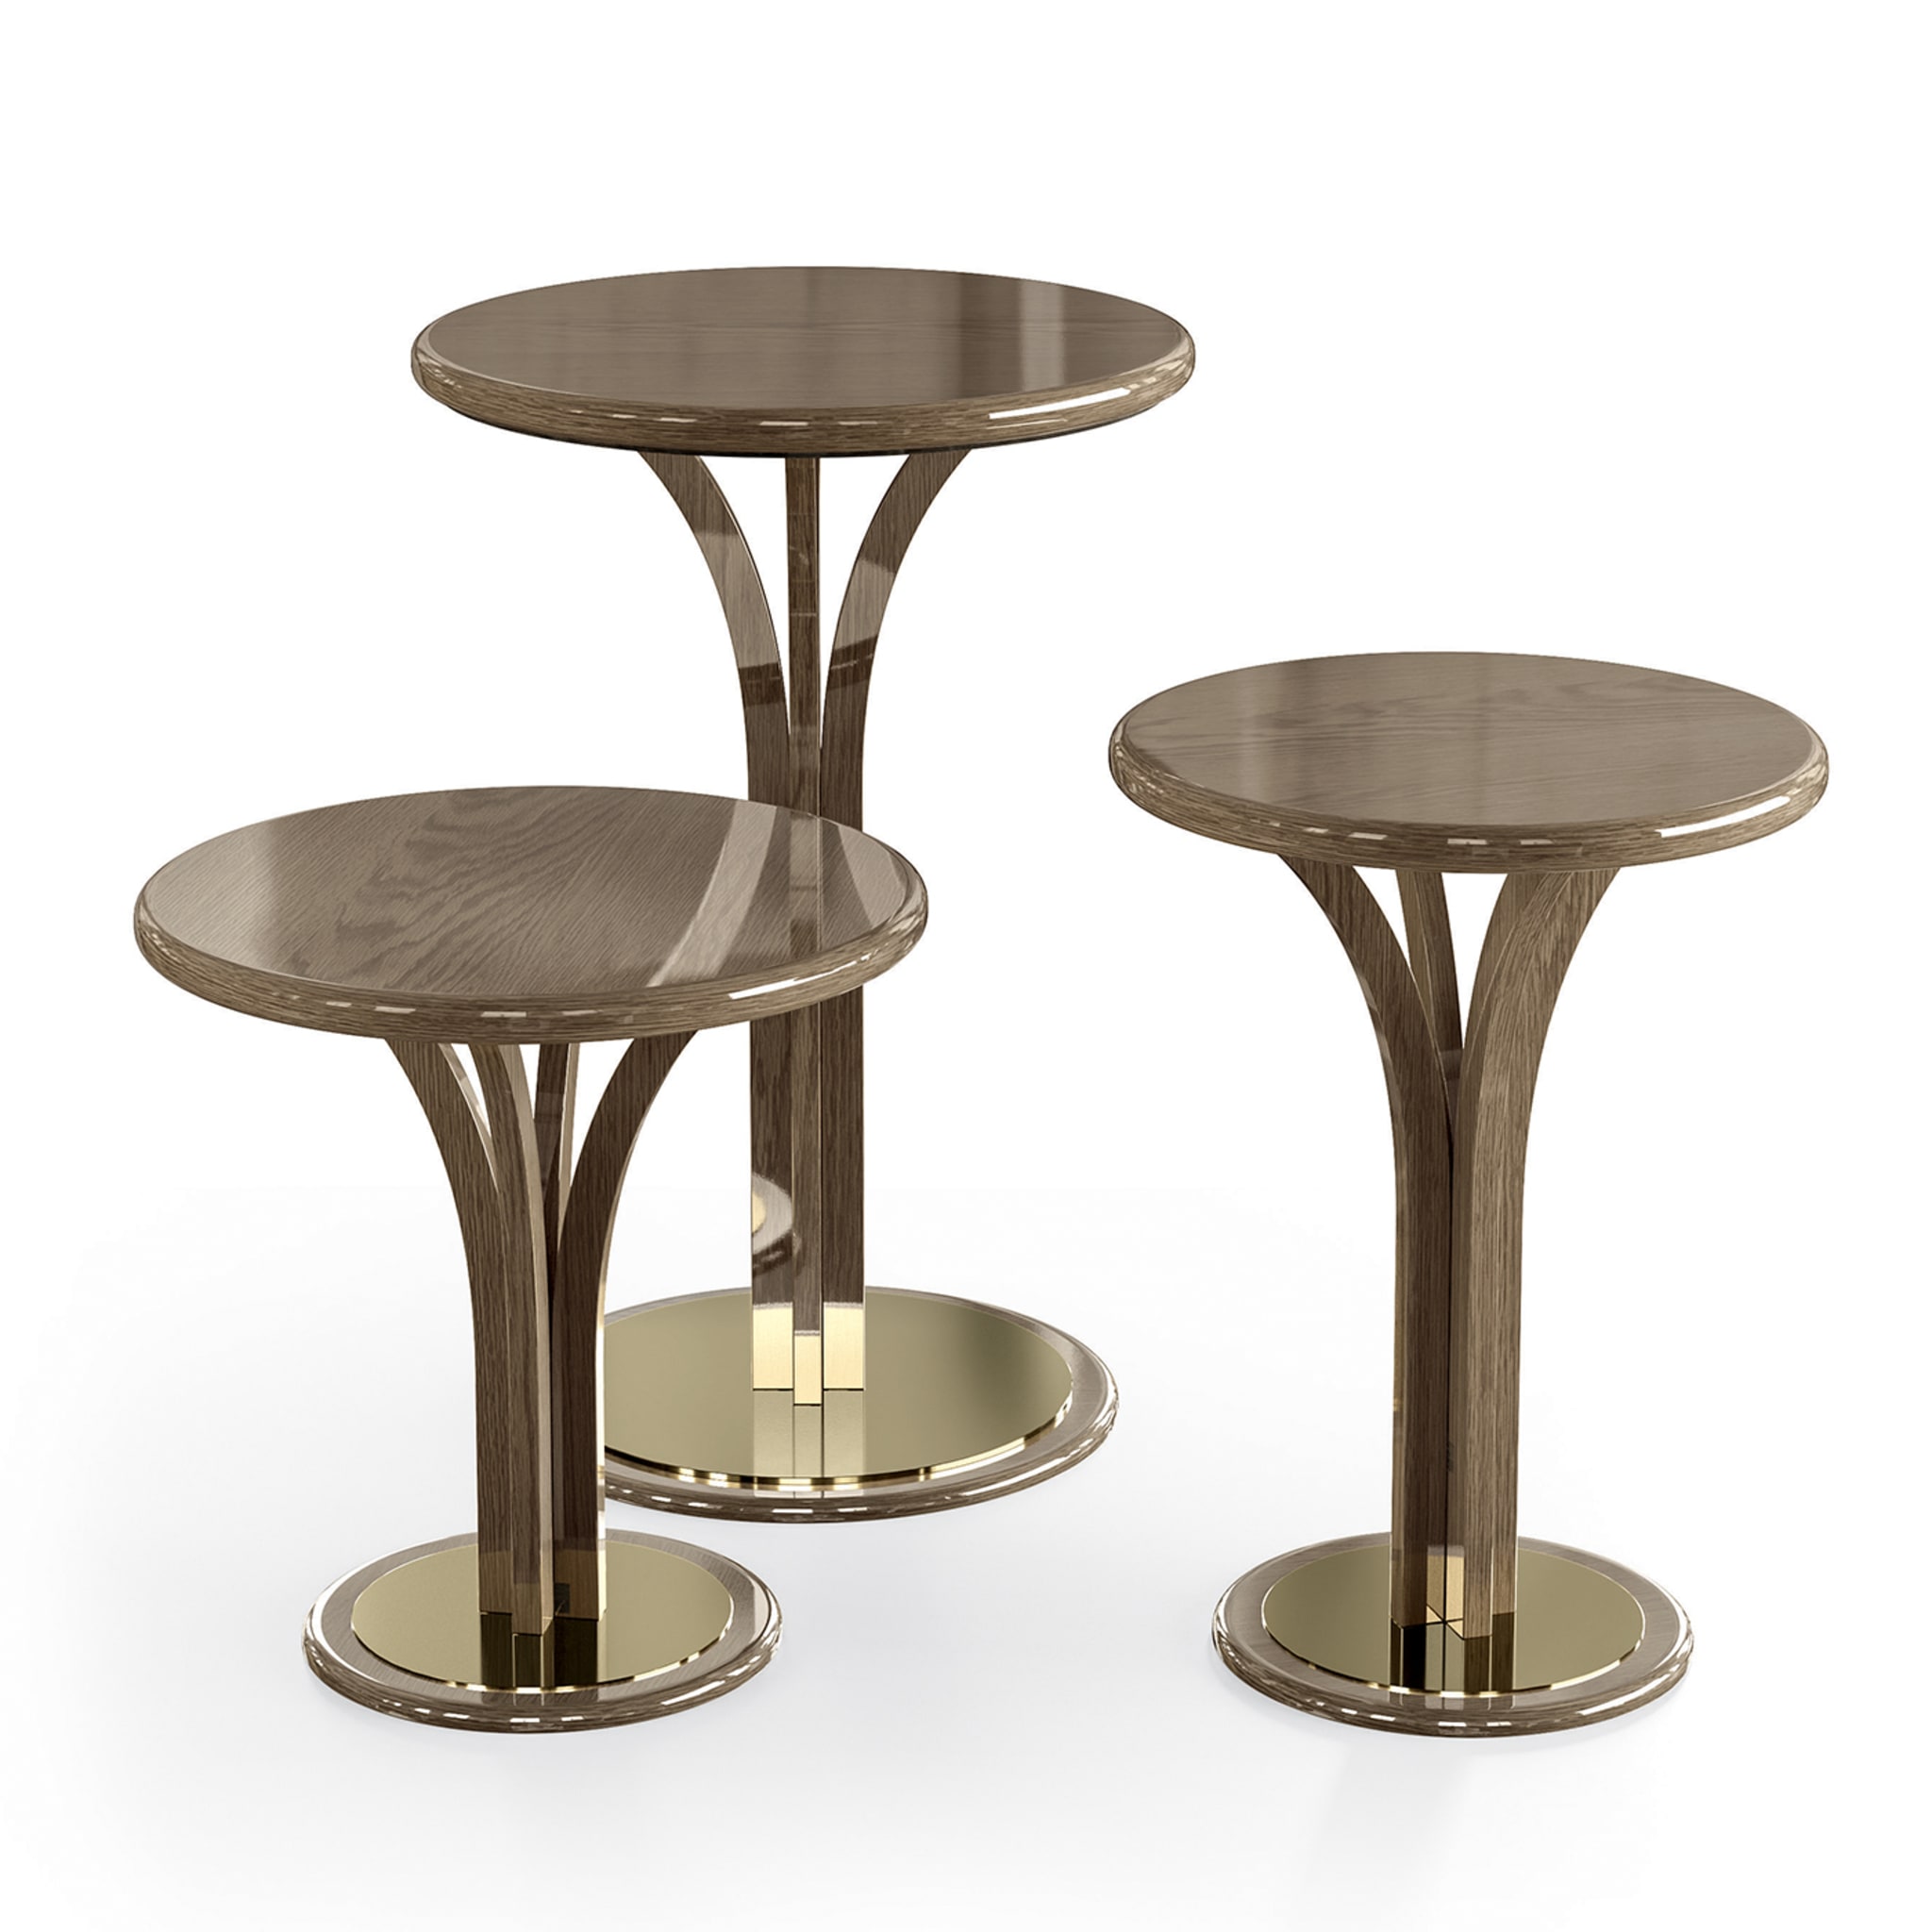 Table d'appoint moyenne - Vue alternative 1